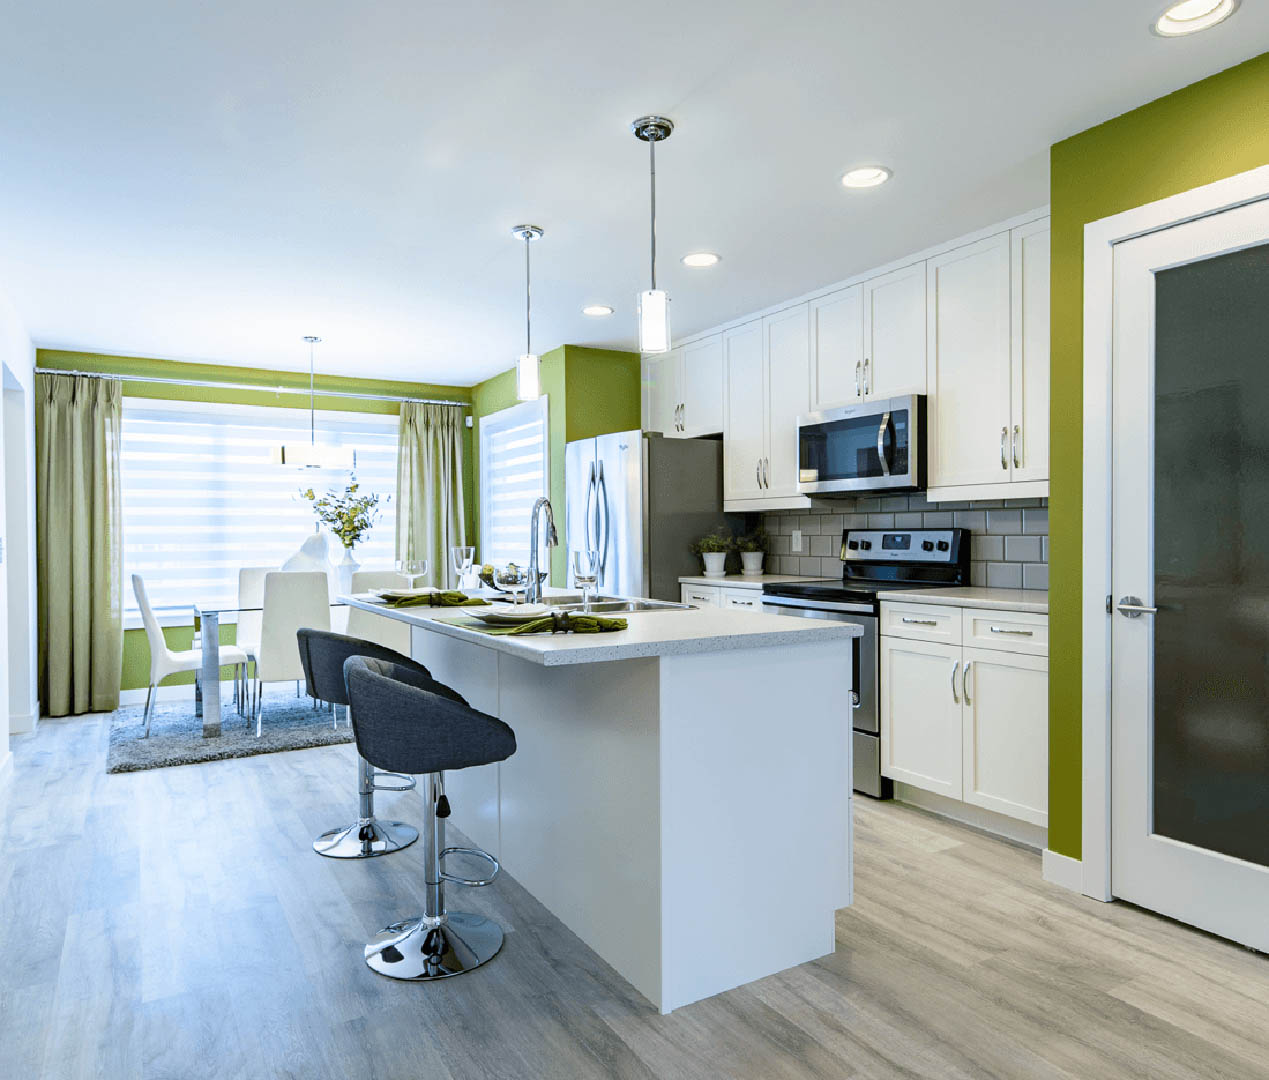 Step Up Your Storage Game The Kitchen Green Image